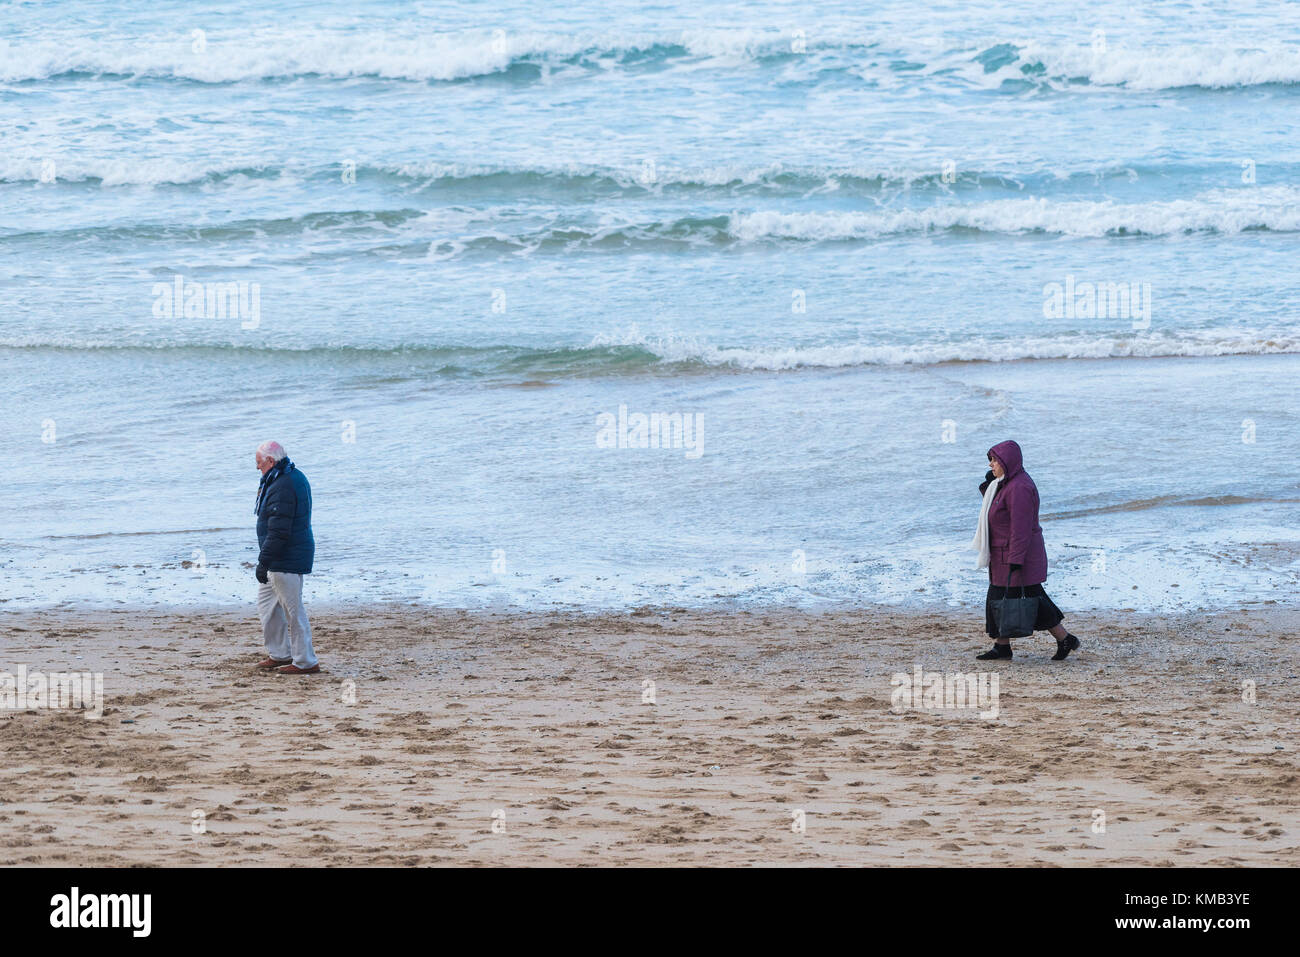 A man walking along Fistral Beach with his wife following behind in Newquay Cornwall UK. Stock Photo